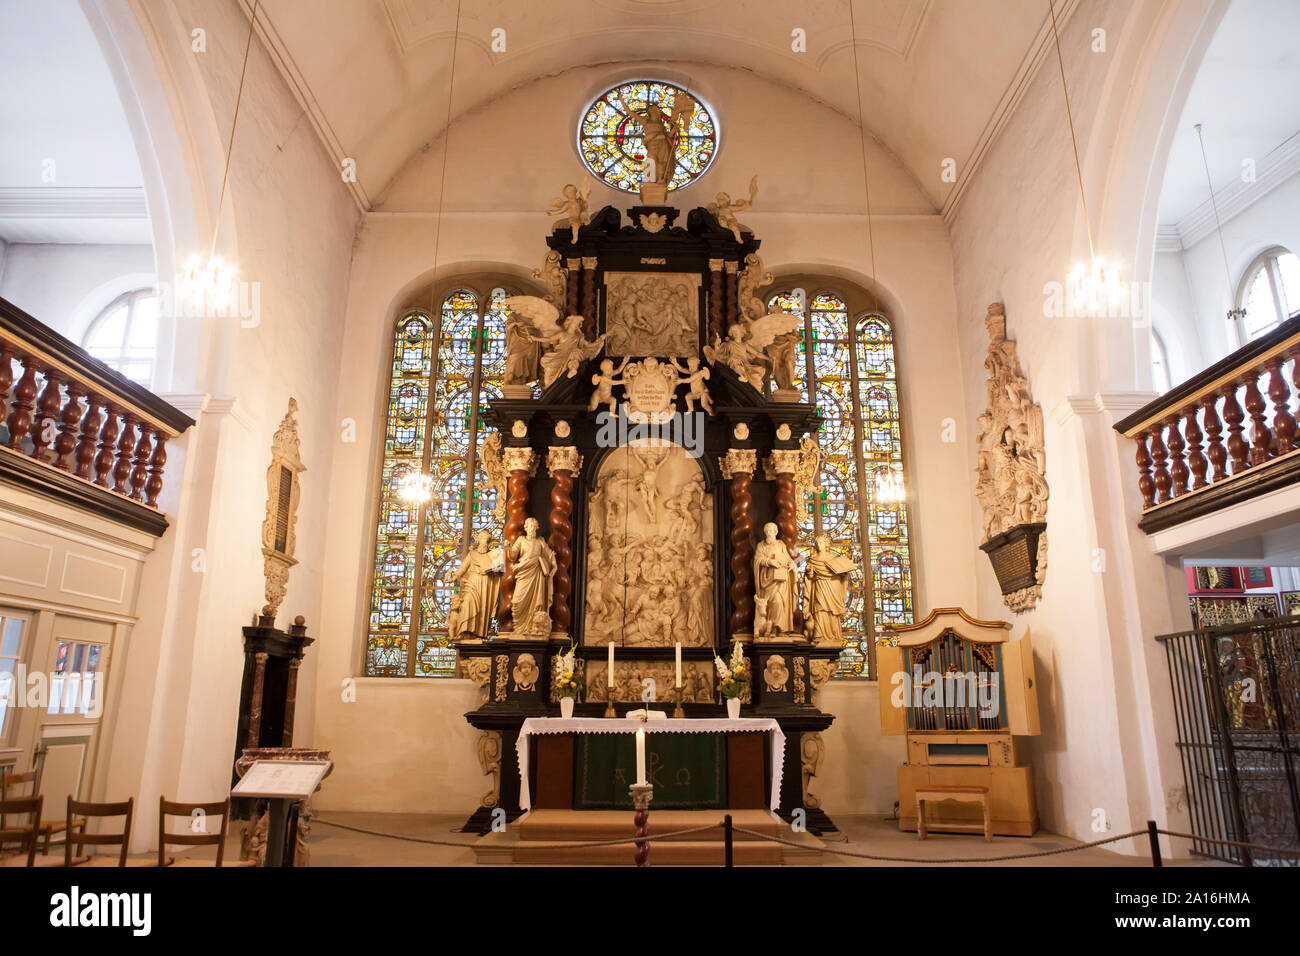 Baroque altar by Christian Precht, 1677,  St. Cosmae-Church, Stade, Lower Saxony, Germany, Europe Stock Photo